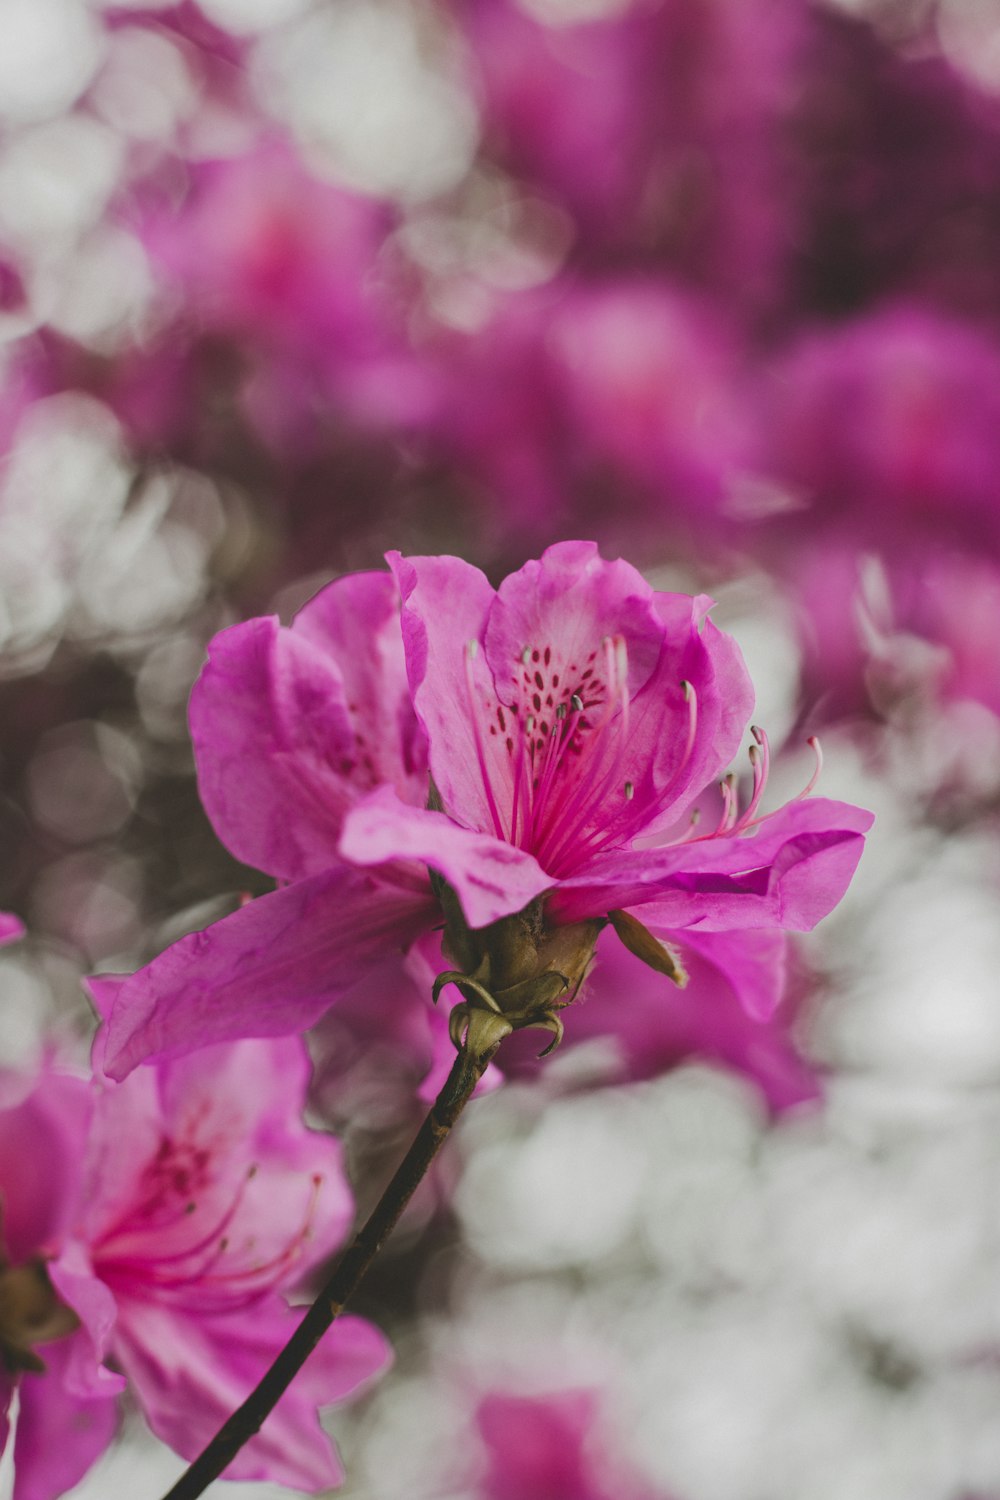 a close up of a pink flower with blurry background